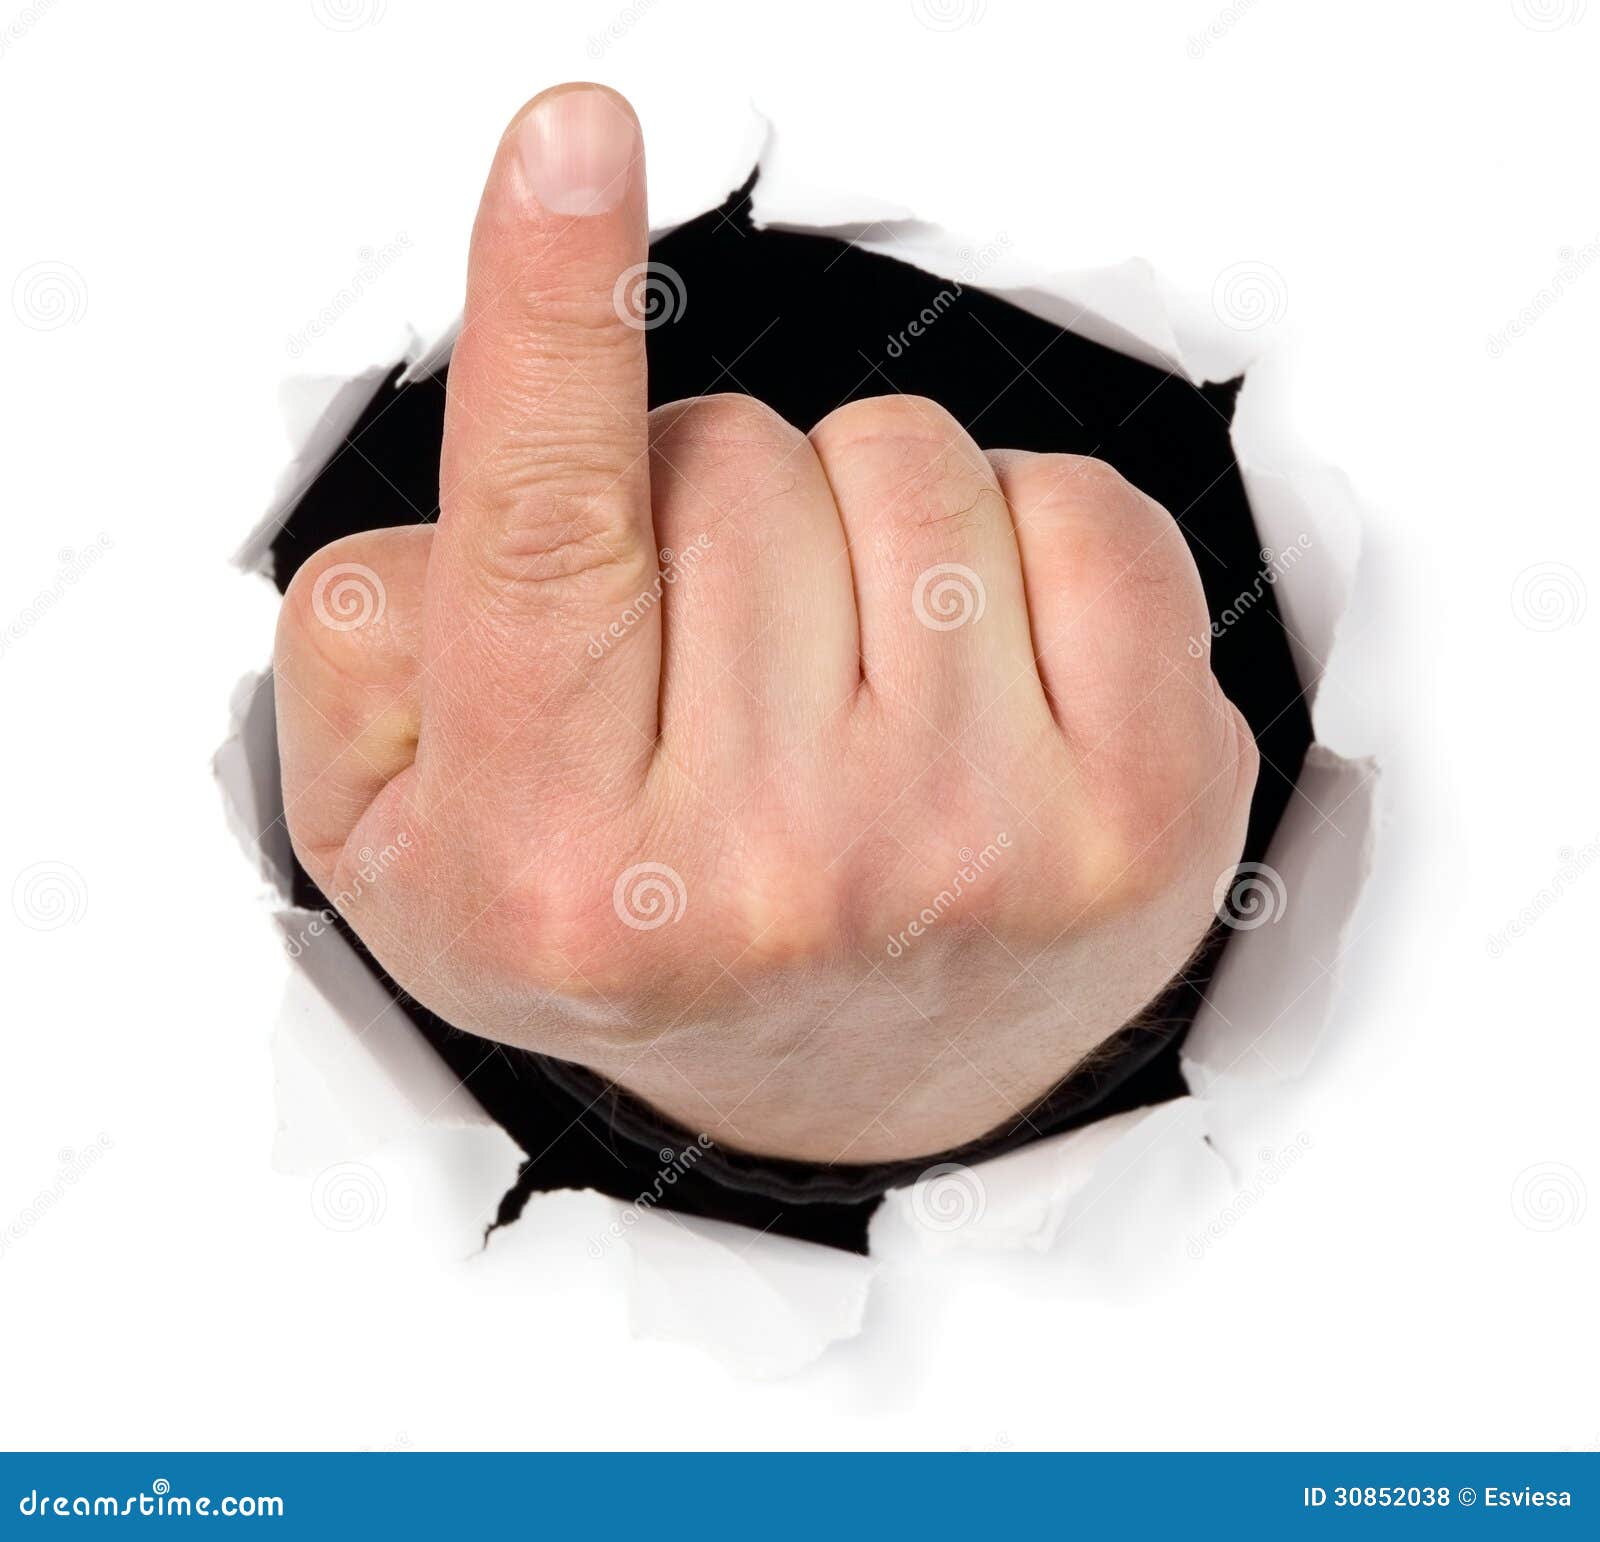 man-showing-his-fingers-hole-white-paper-30852038.jpg